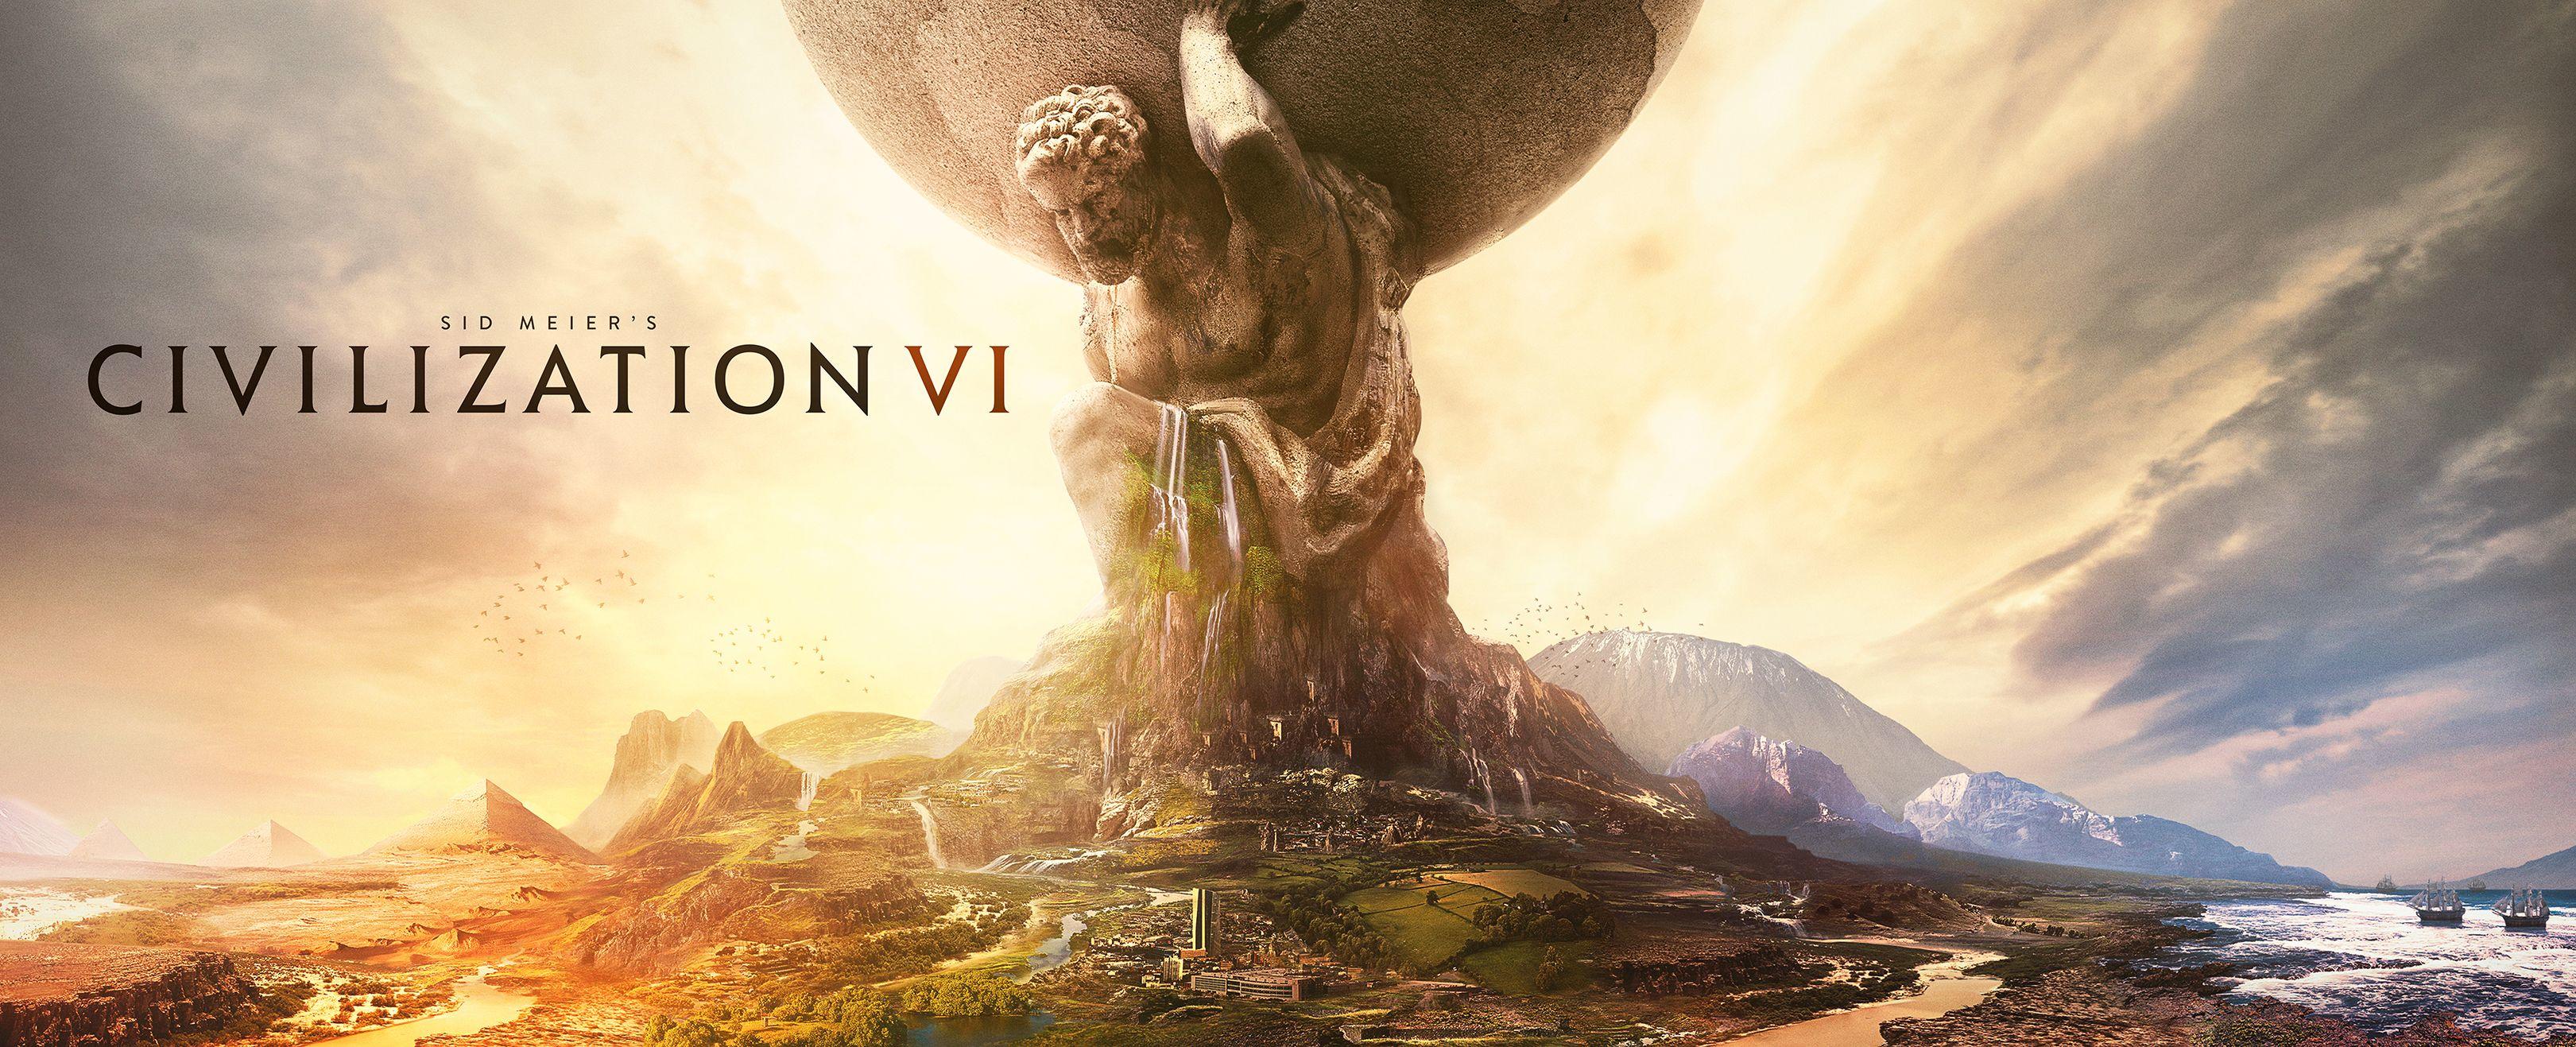 The Reveal Trailer For Civilization VI Get Analyzed!